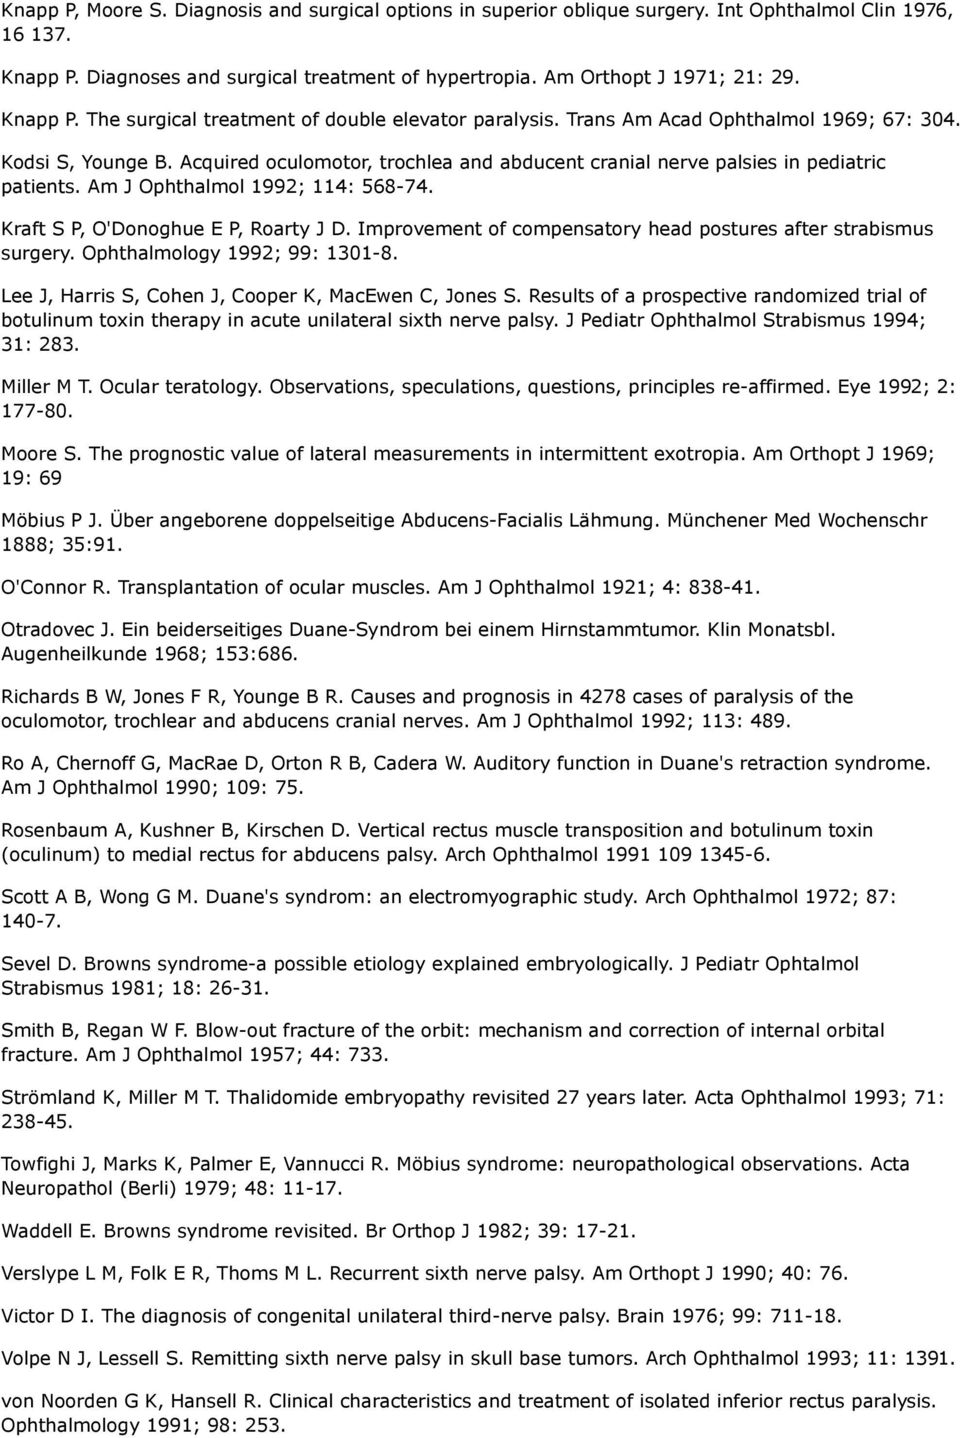 Acquired oculomotor, trochlea and abducent cranial nerve palsies in pediatric patients. Am J Ophthalmol 1992; 114: 568-74. Kraft S P, O'Donoghue E P, Roarty J D.